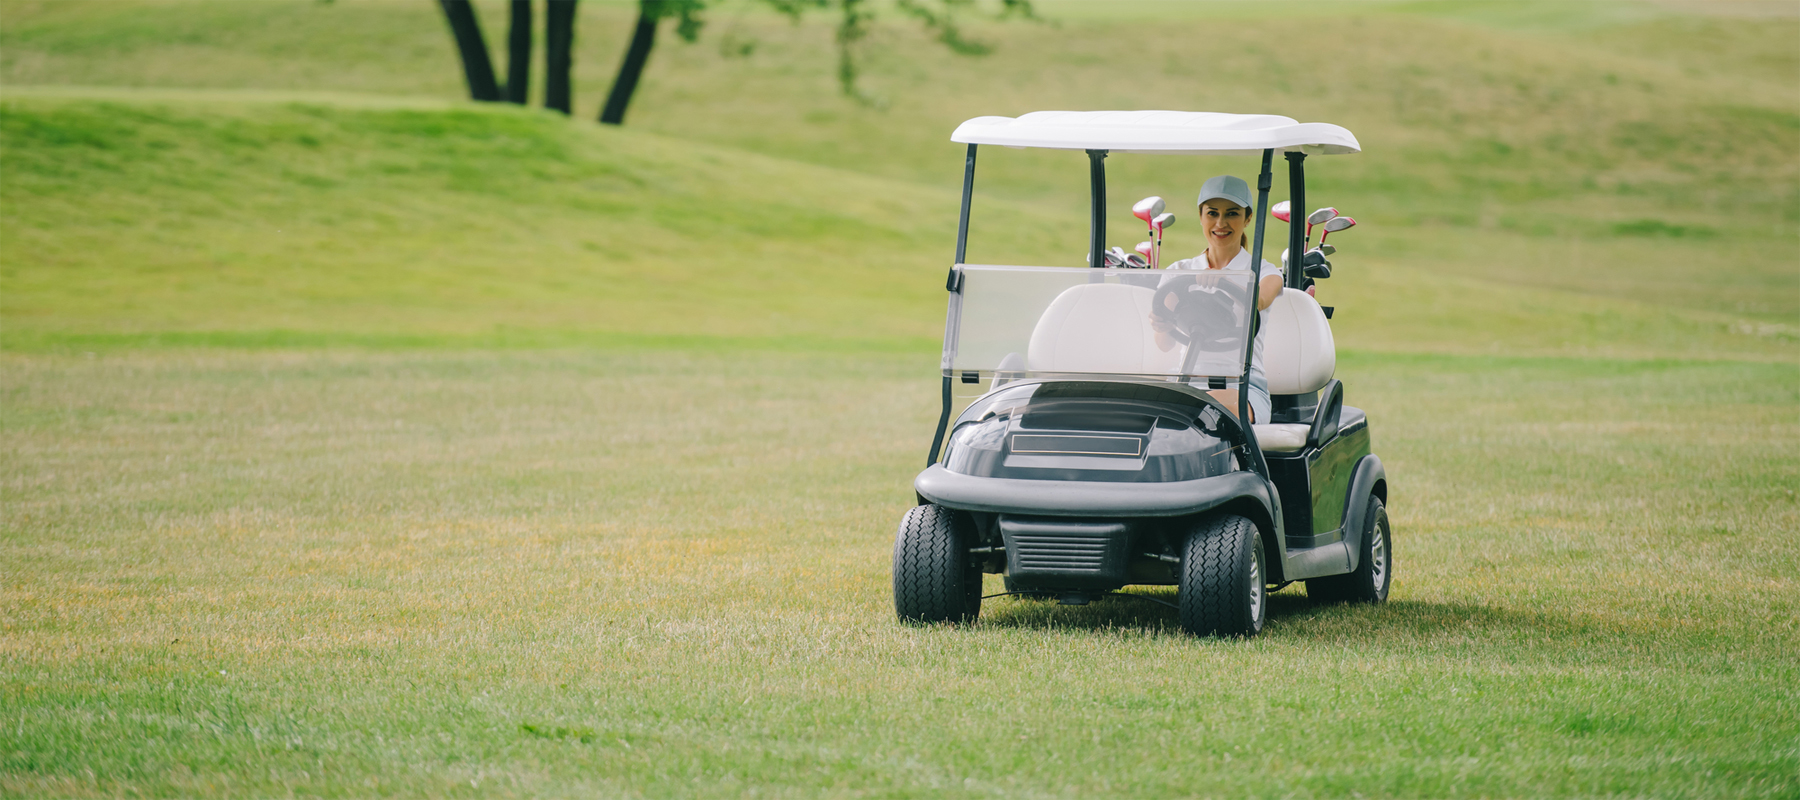 Woman in Used Golf Cart on Golf Course